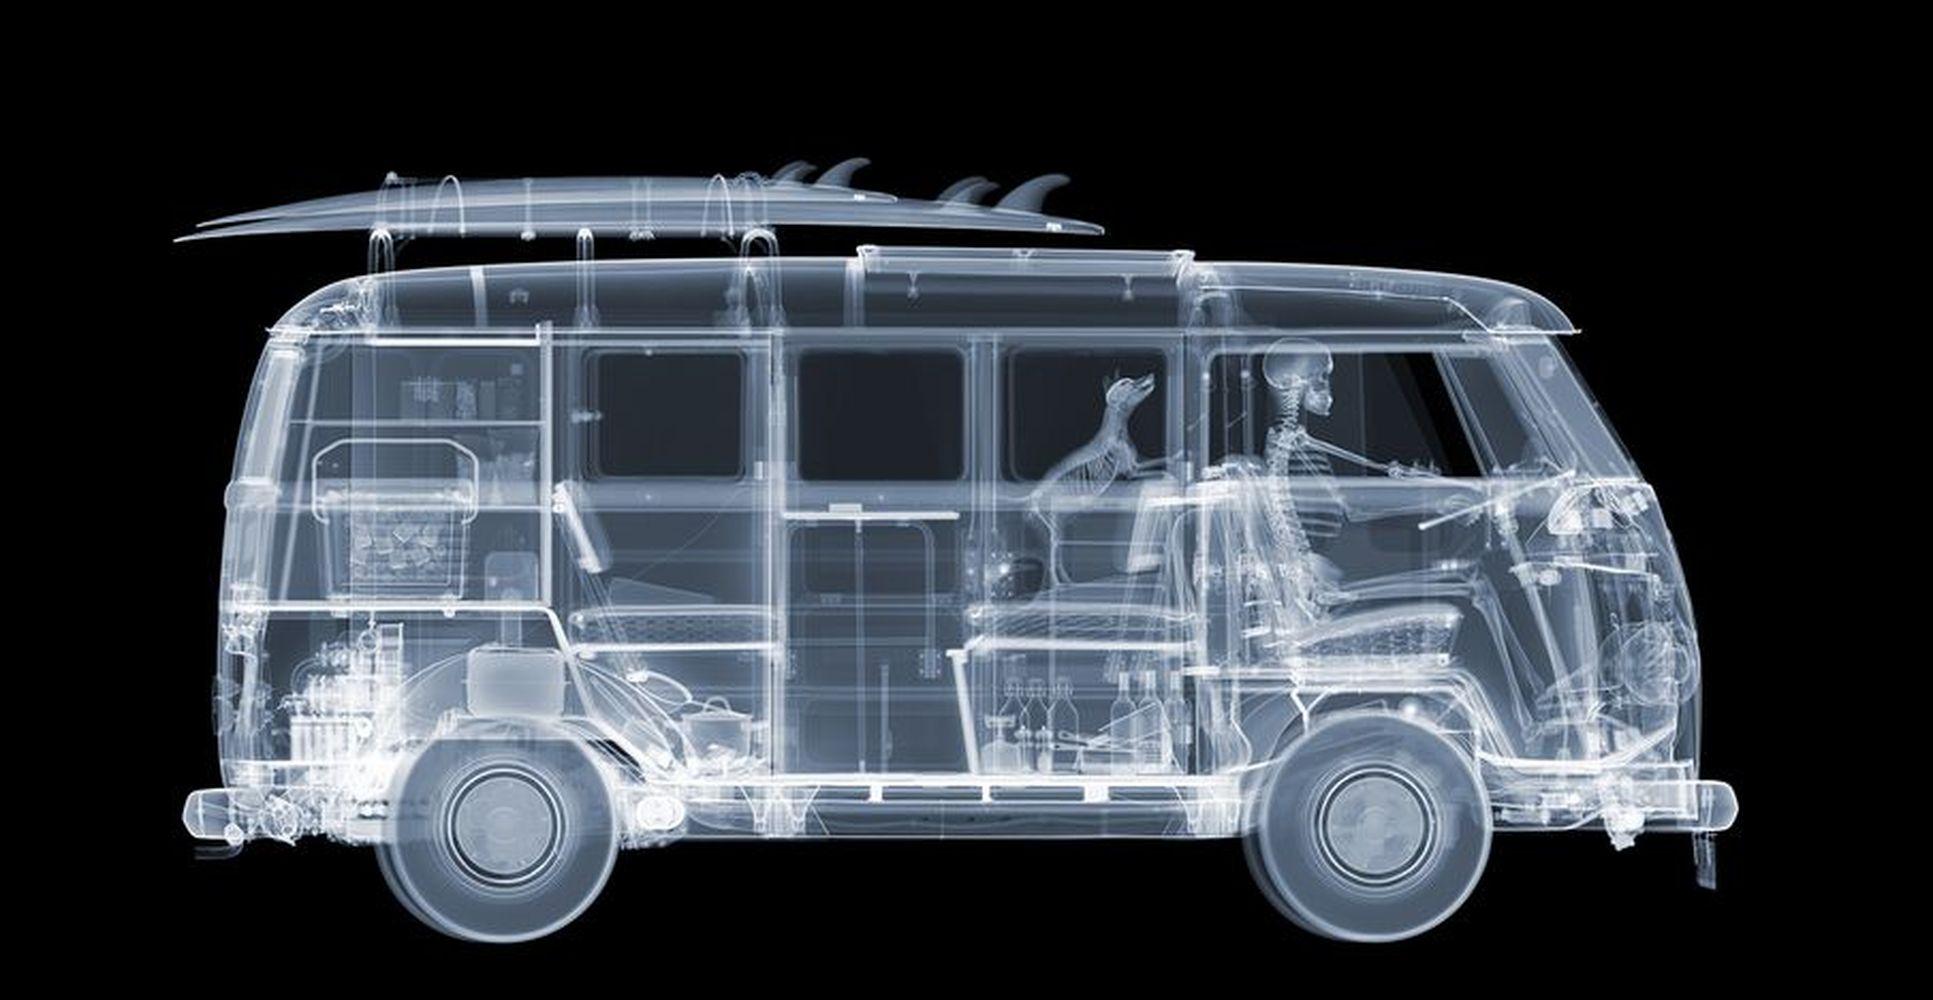 nick veasey prints for sale